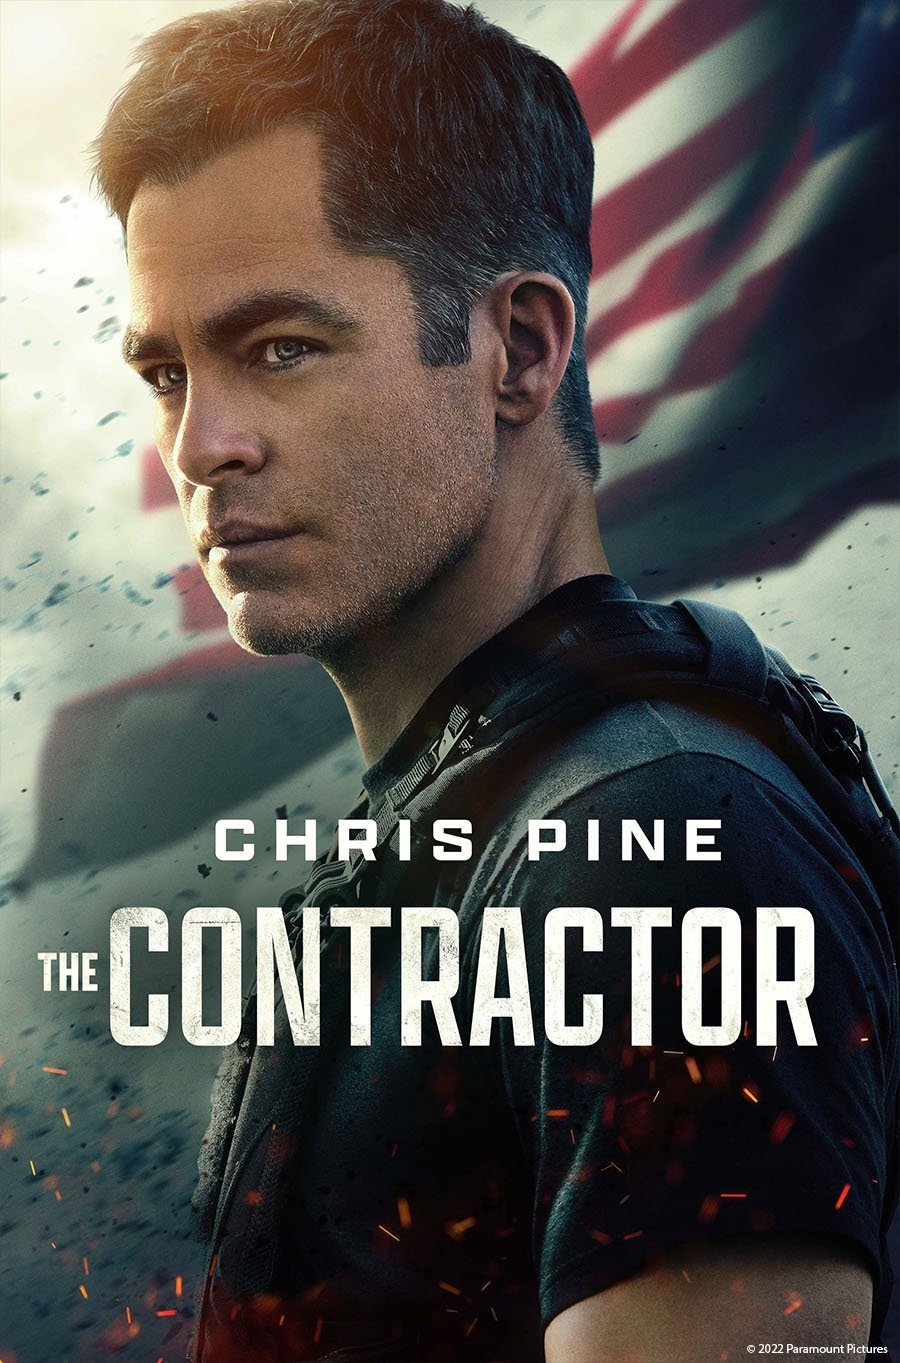 The Contractor poster image.jpg